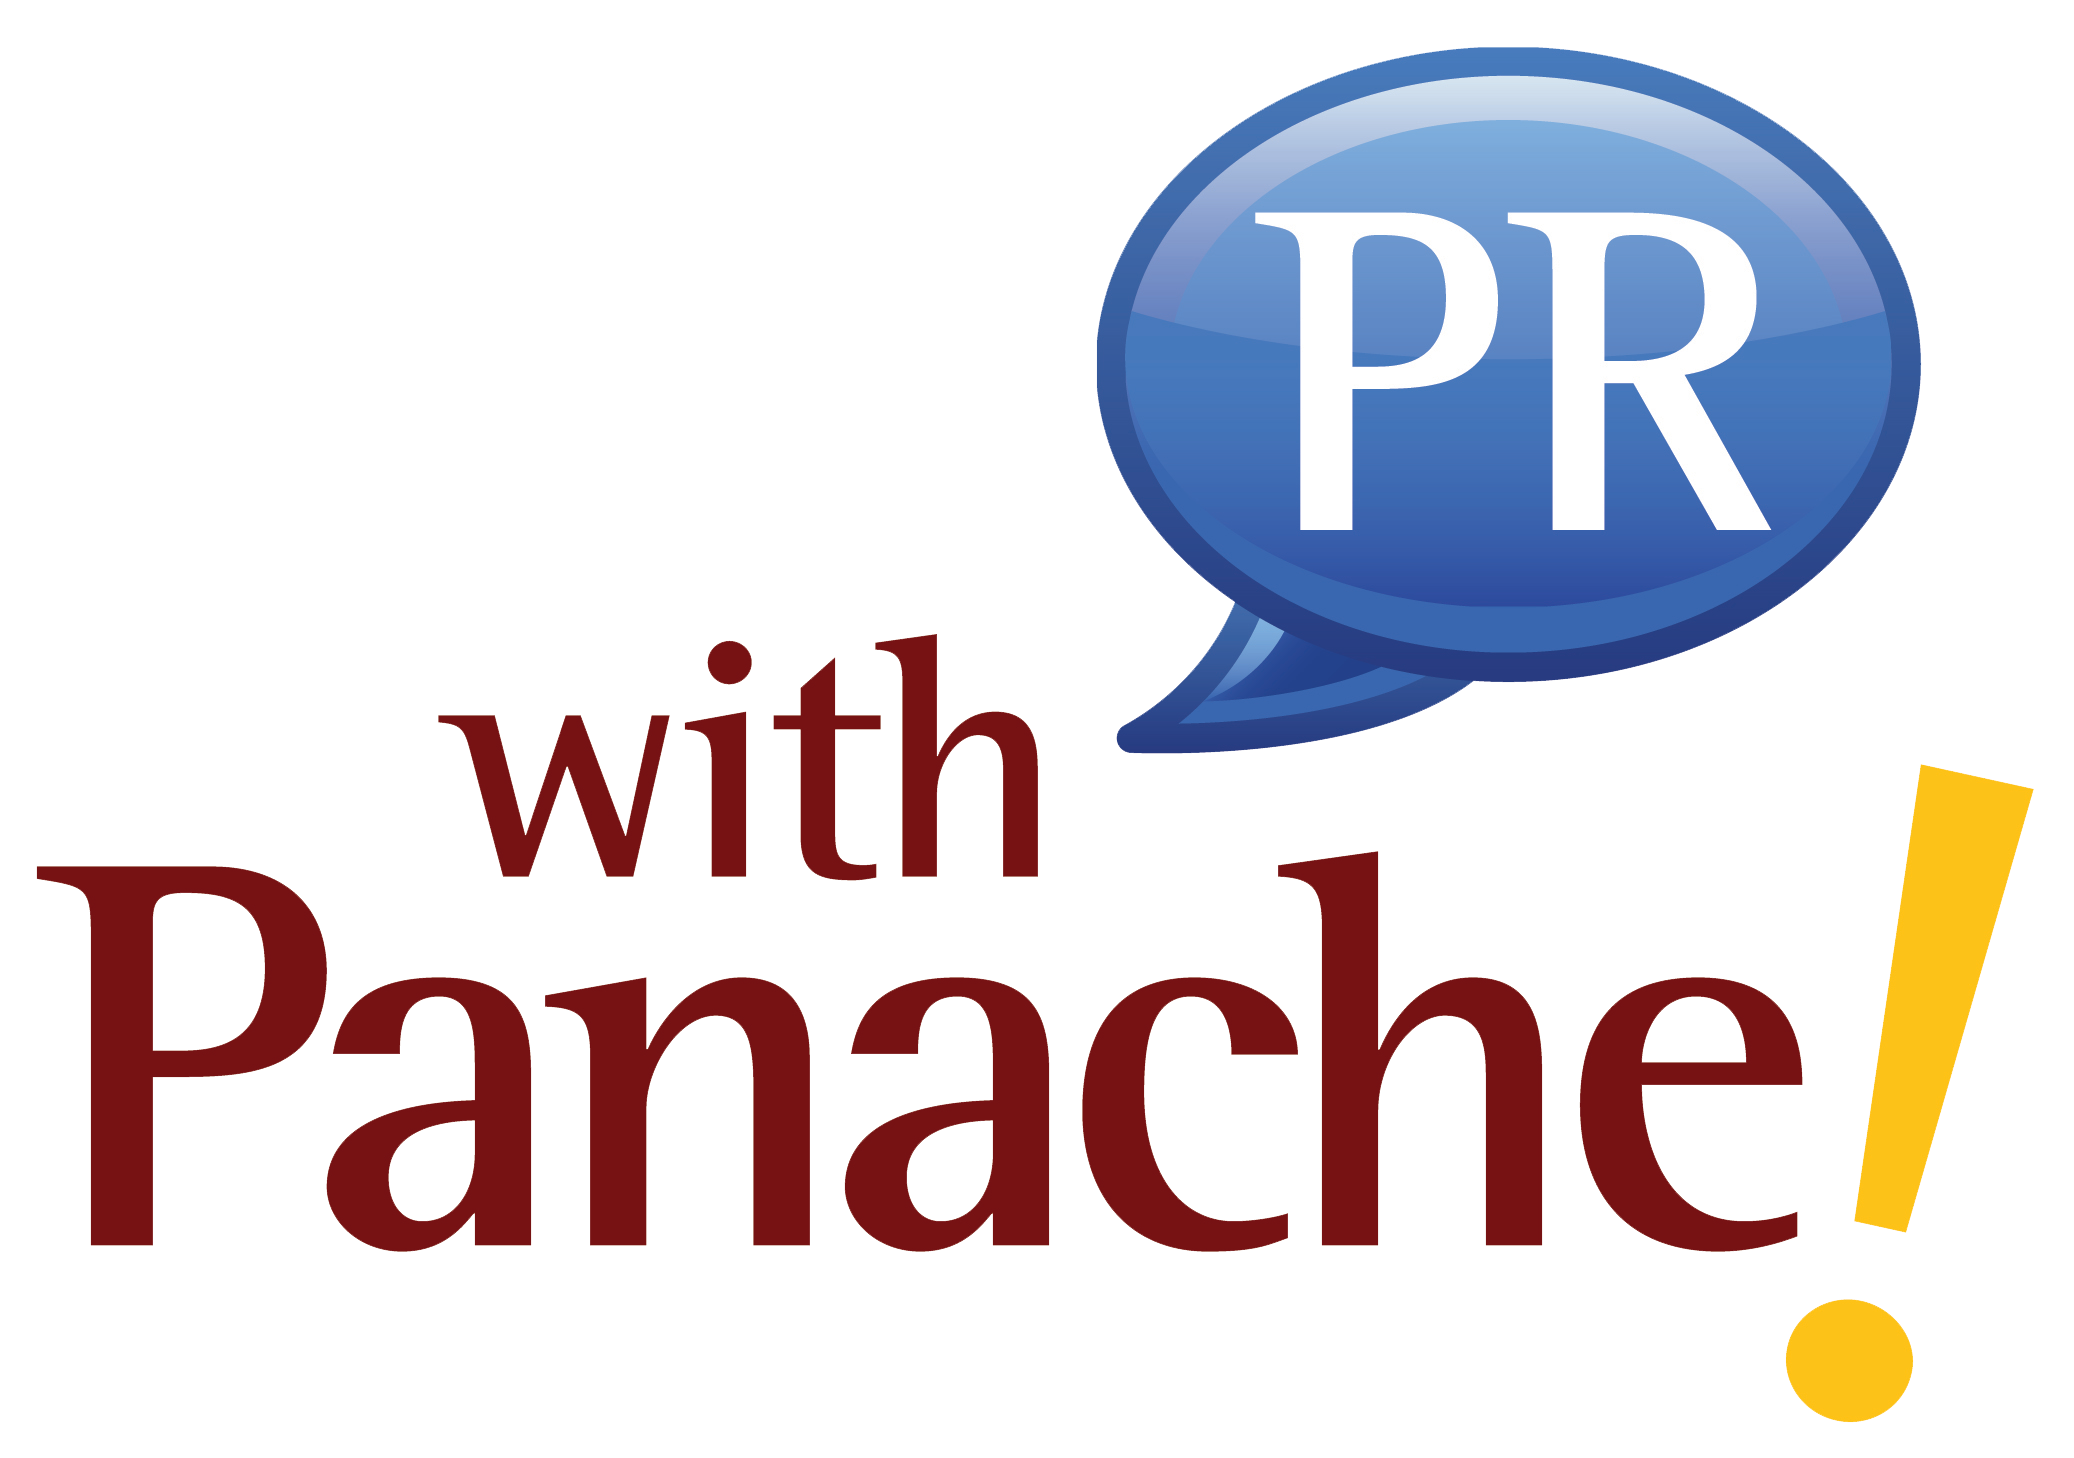 PR with Panache! Strengthens Creative Team with Addition of Ed Tech Editor Chris Piehler